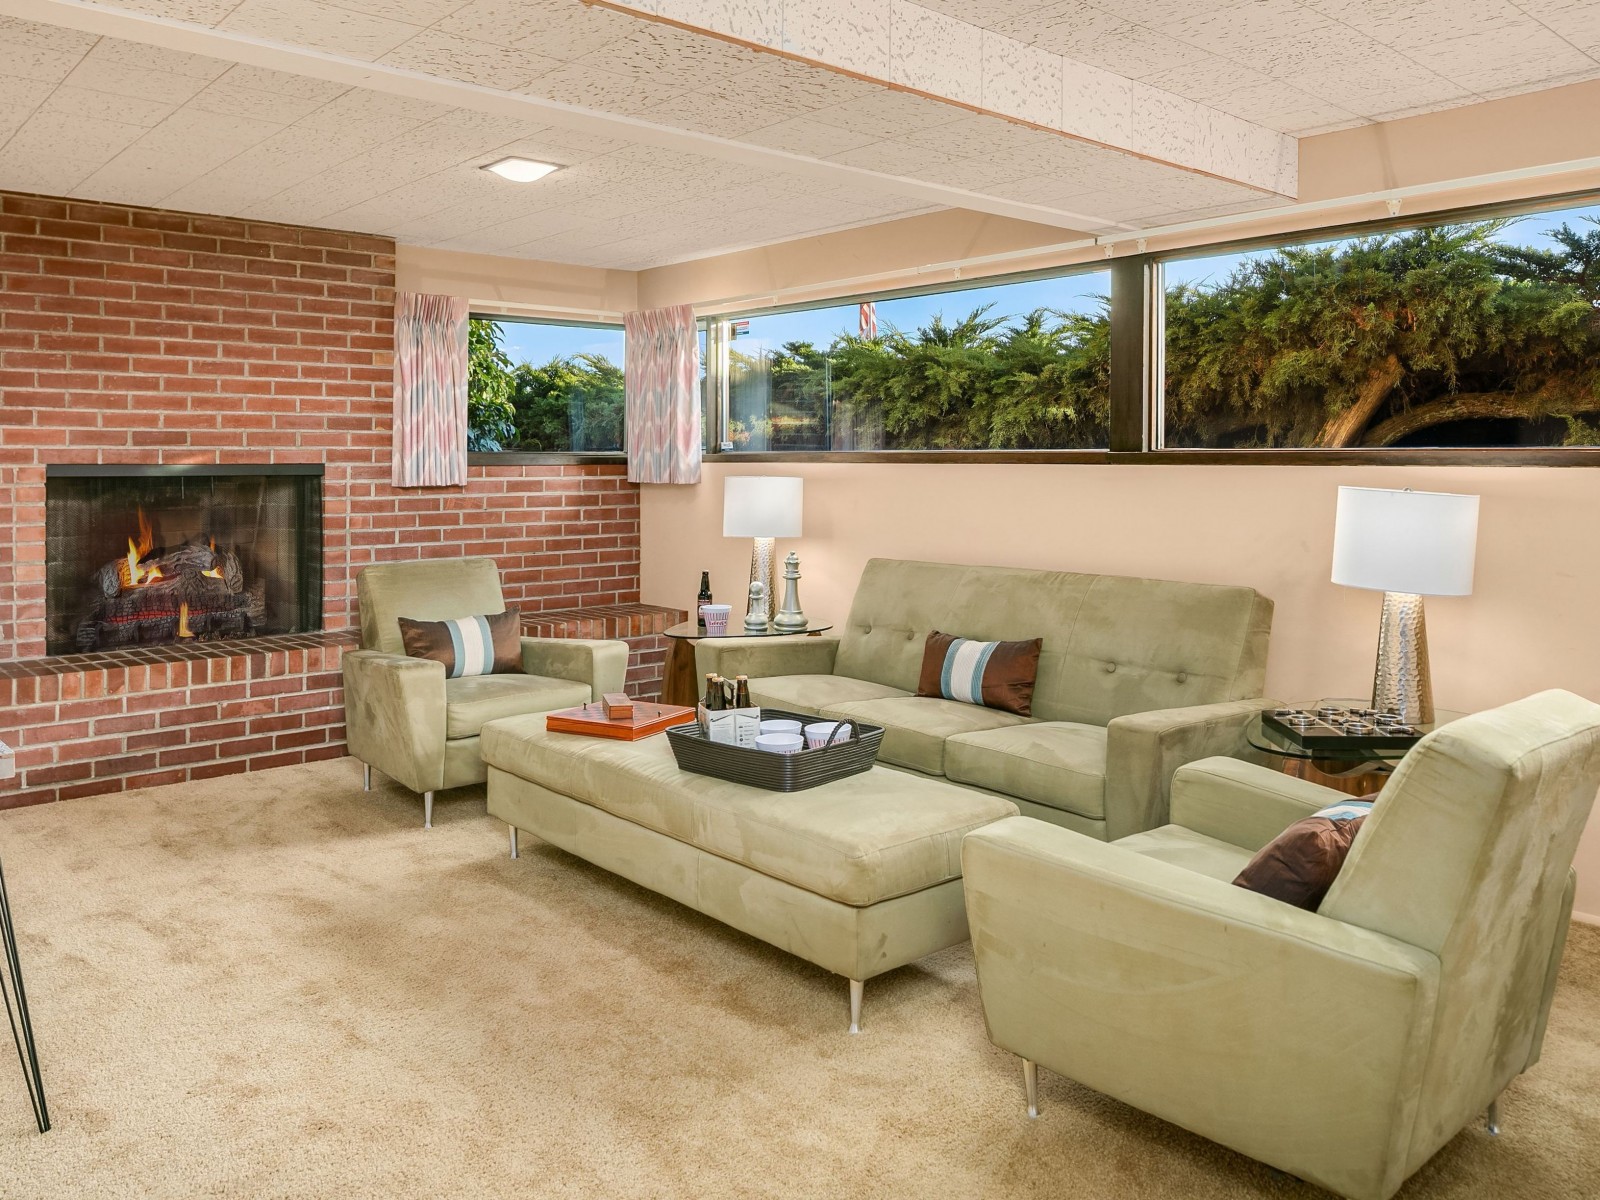 This Mid-Century Modern home, represented by <a href="https://www.themarynorris.com/">Realogics Sotheby's International Realty Global Real Estate Advisor Mary Norris</a>, is an unaltered gem that garnered a closing sales price $750K over the listing.